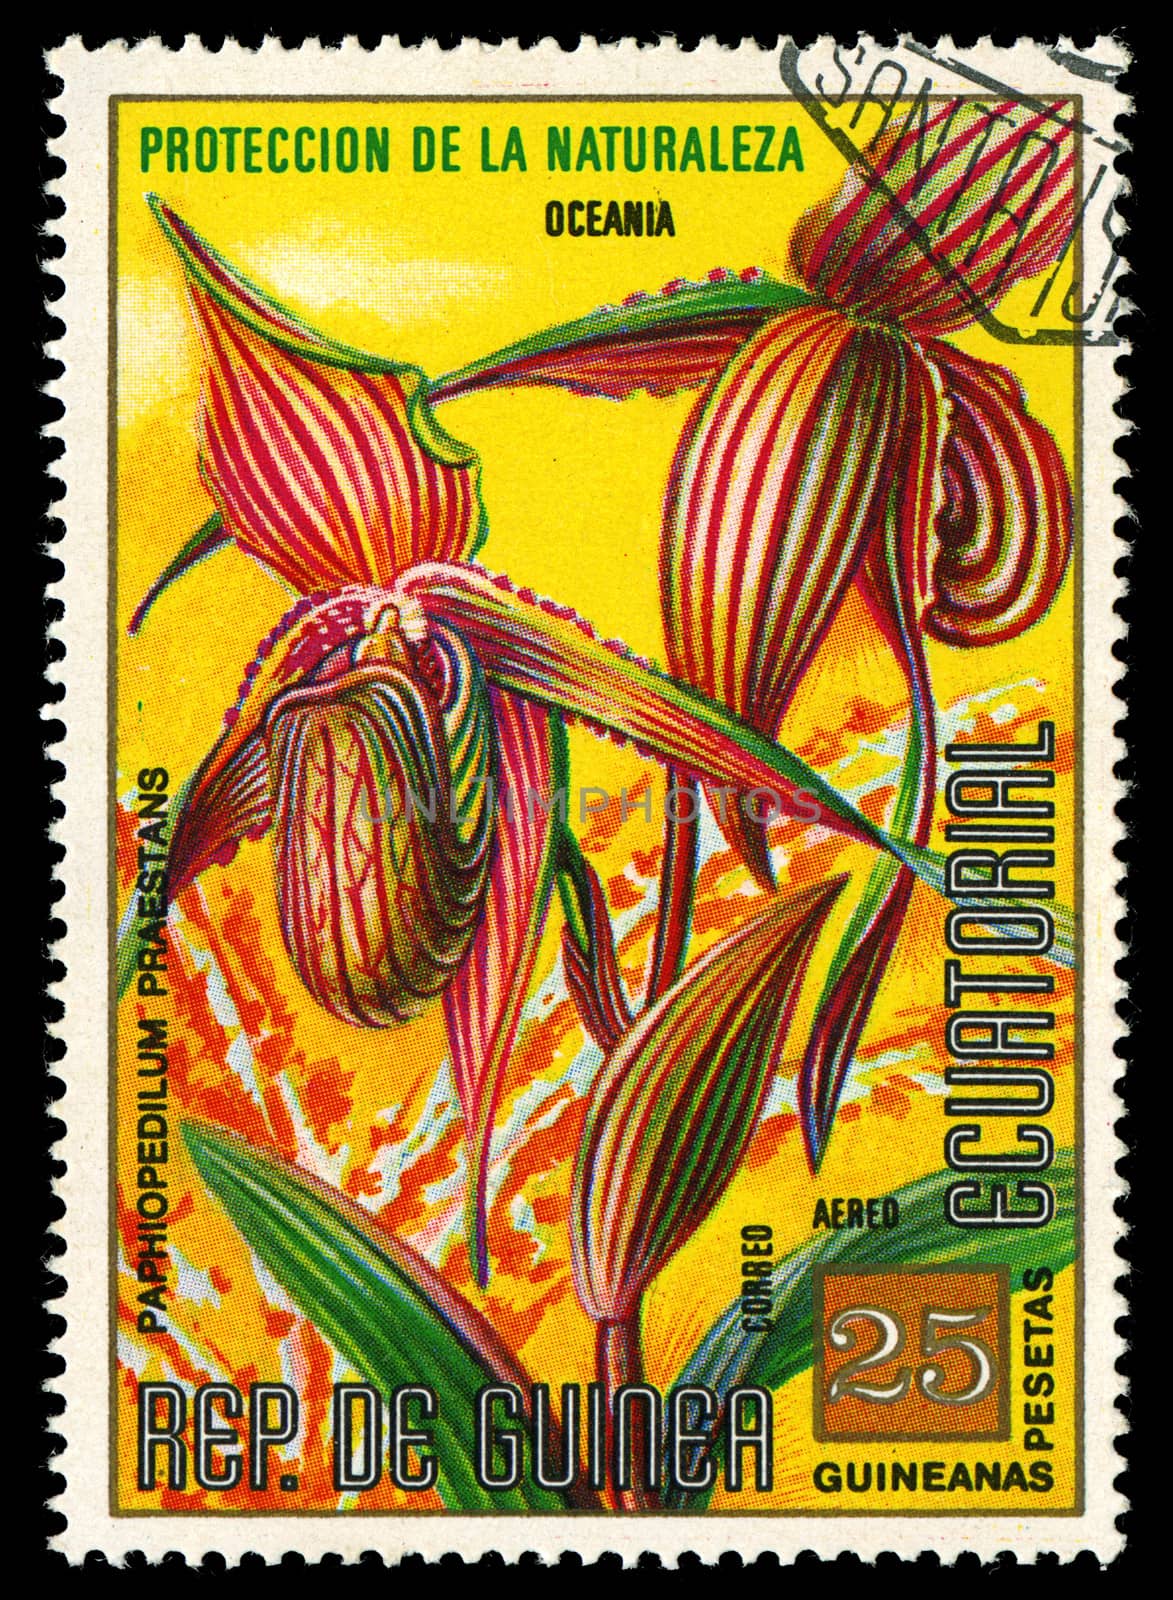 EQUATORIAL GUINEA - CIRCA 1974: A stamp printed in Equatorial Guinea shows Paphiopedilum Praestans, series is devoted to flowers, circa 1974 by Zhukow